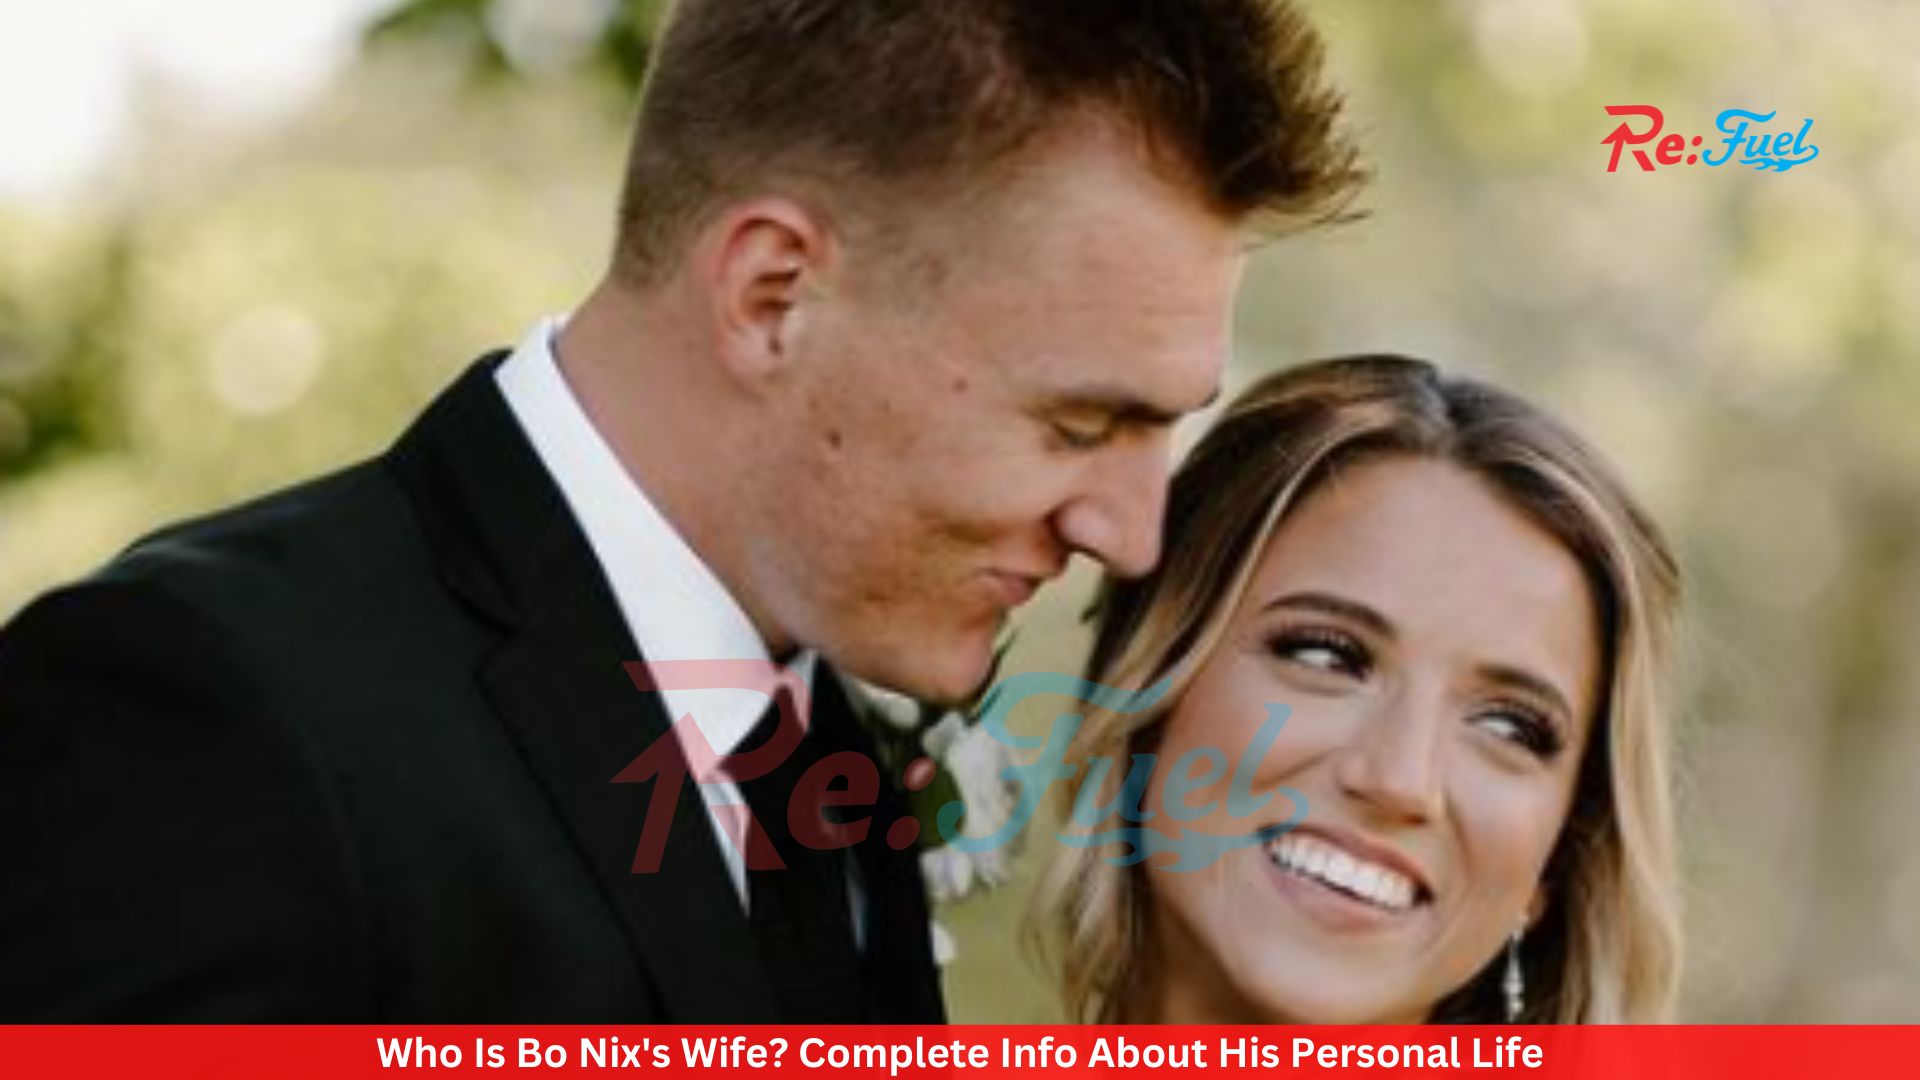 Who Is Bo Nix's Wife? Complete Info About His Personal Life